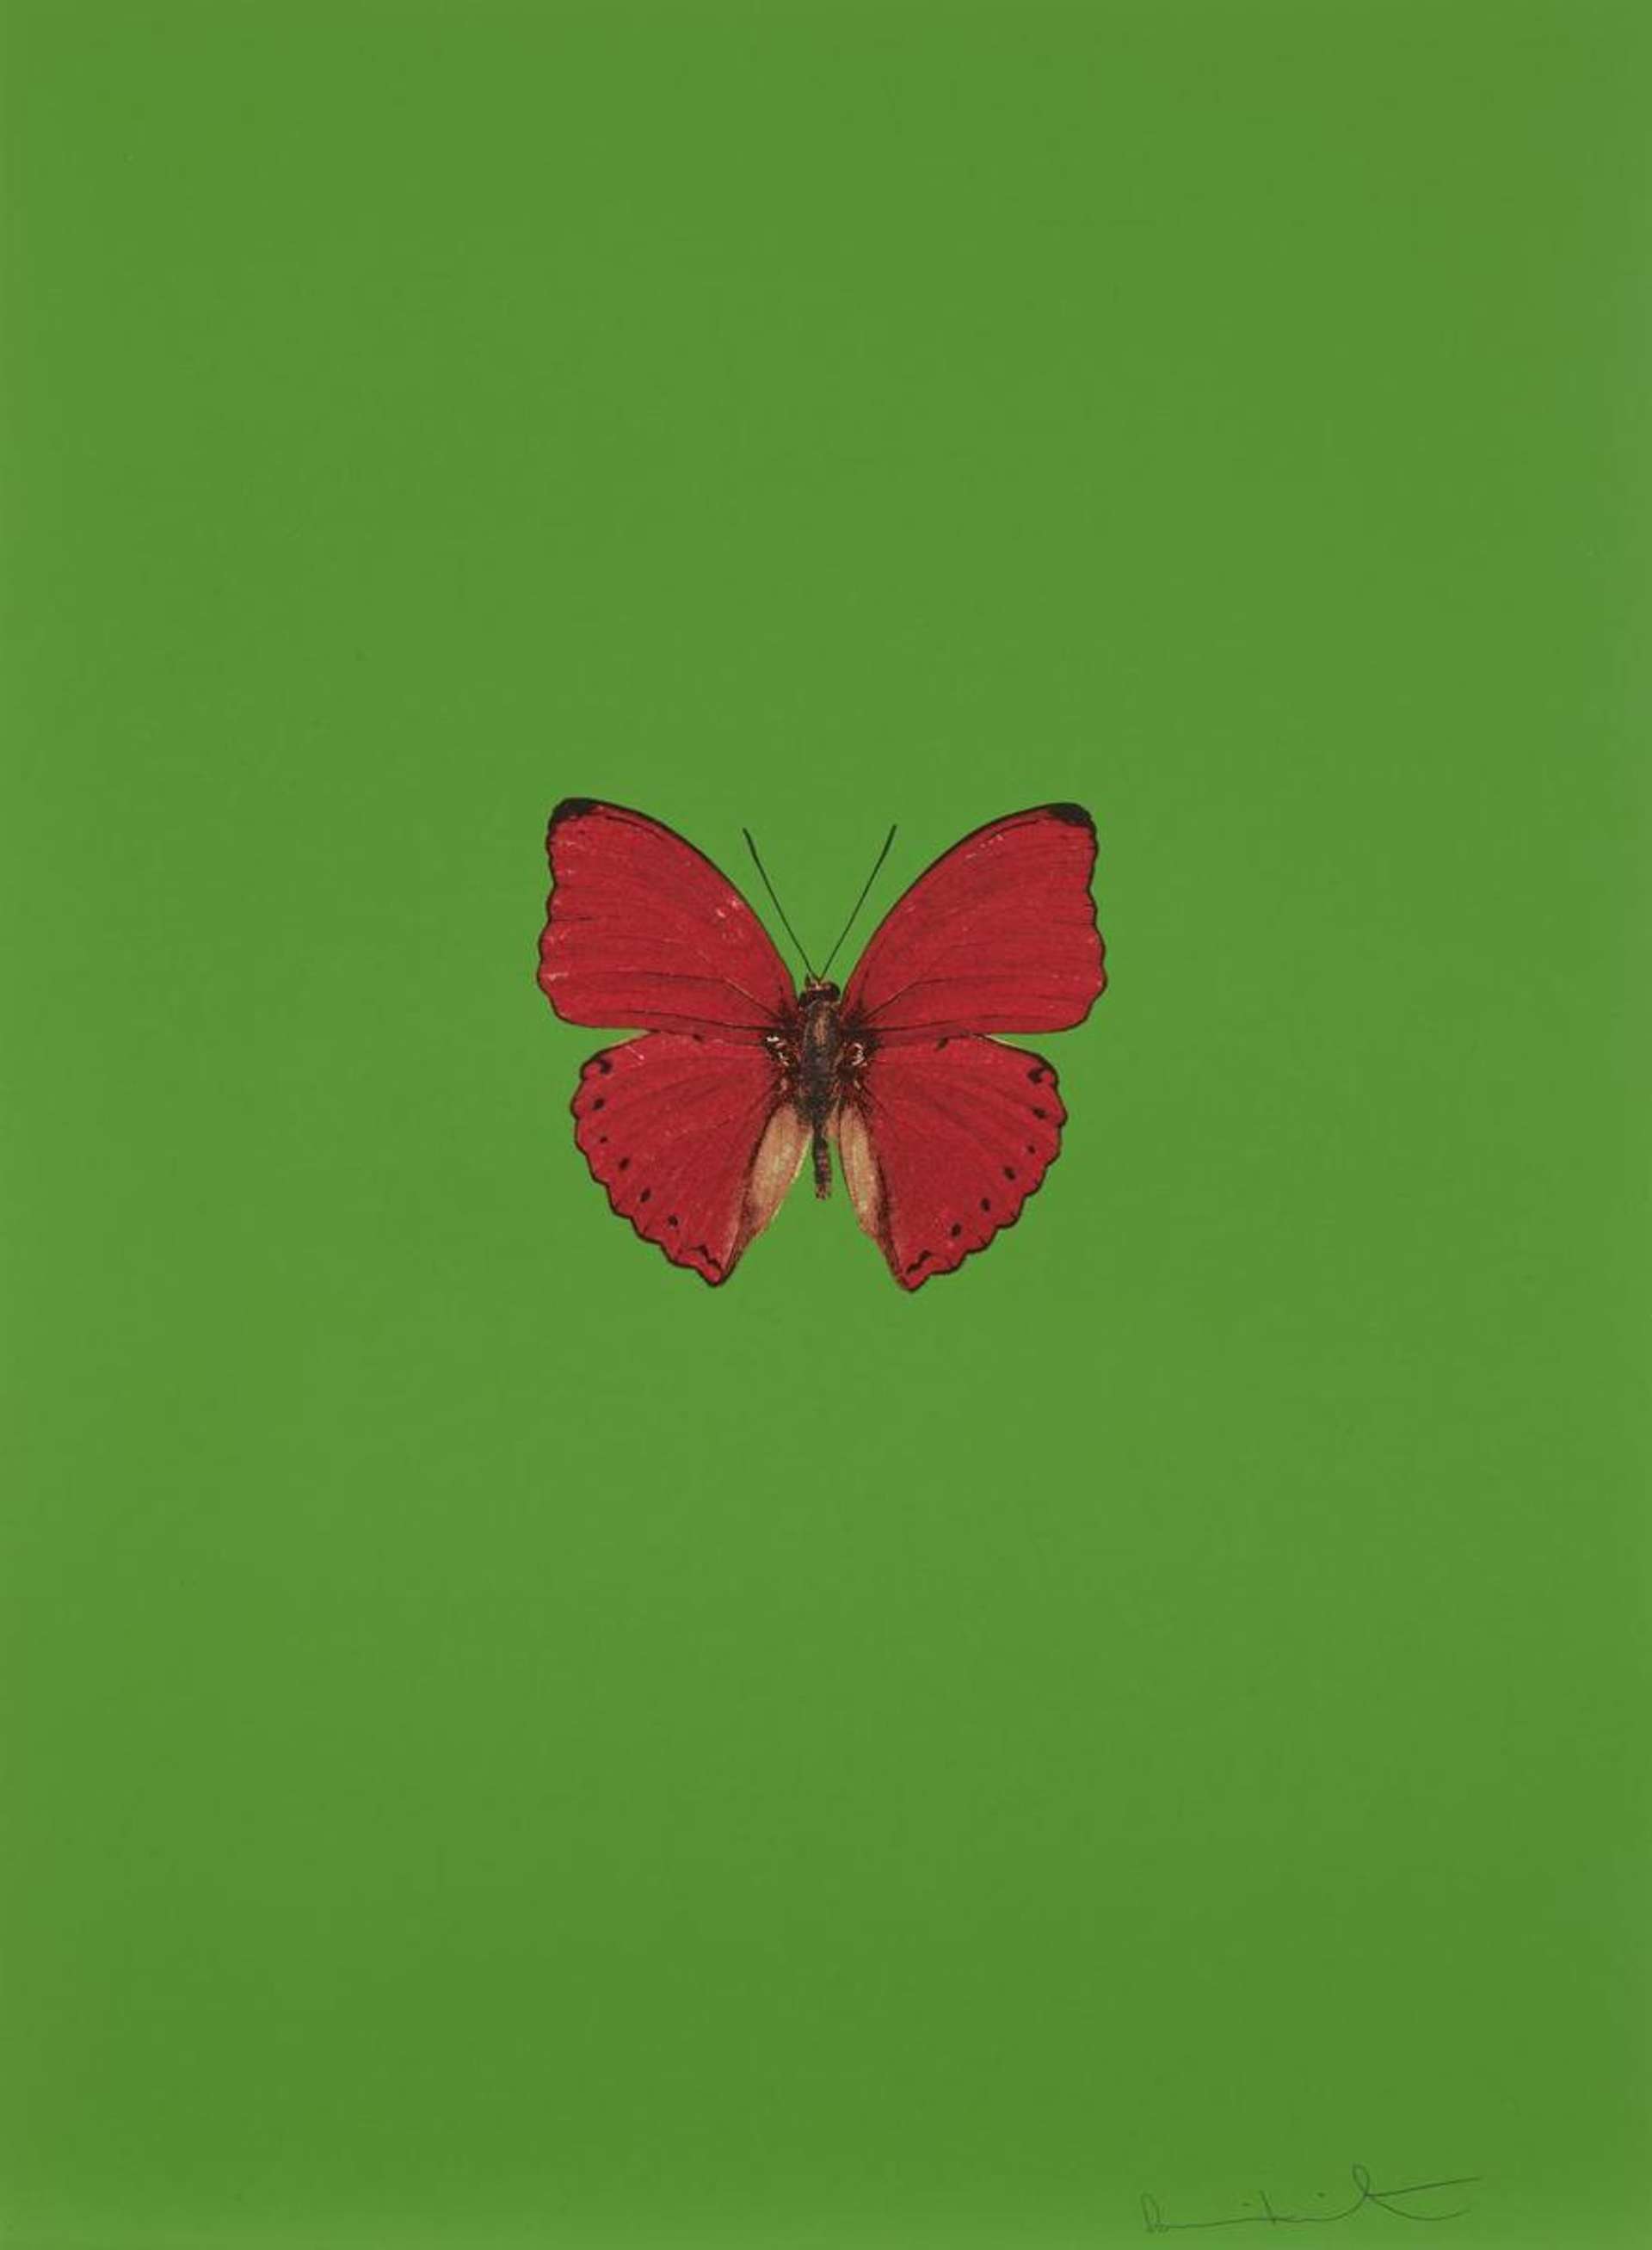 Damien Hirst: It’s a Beautiful Day 2 - Signed Print